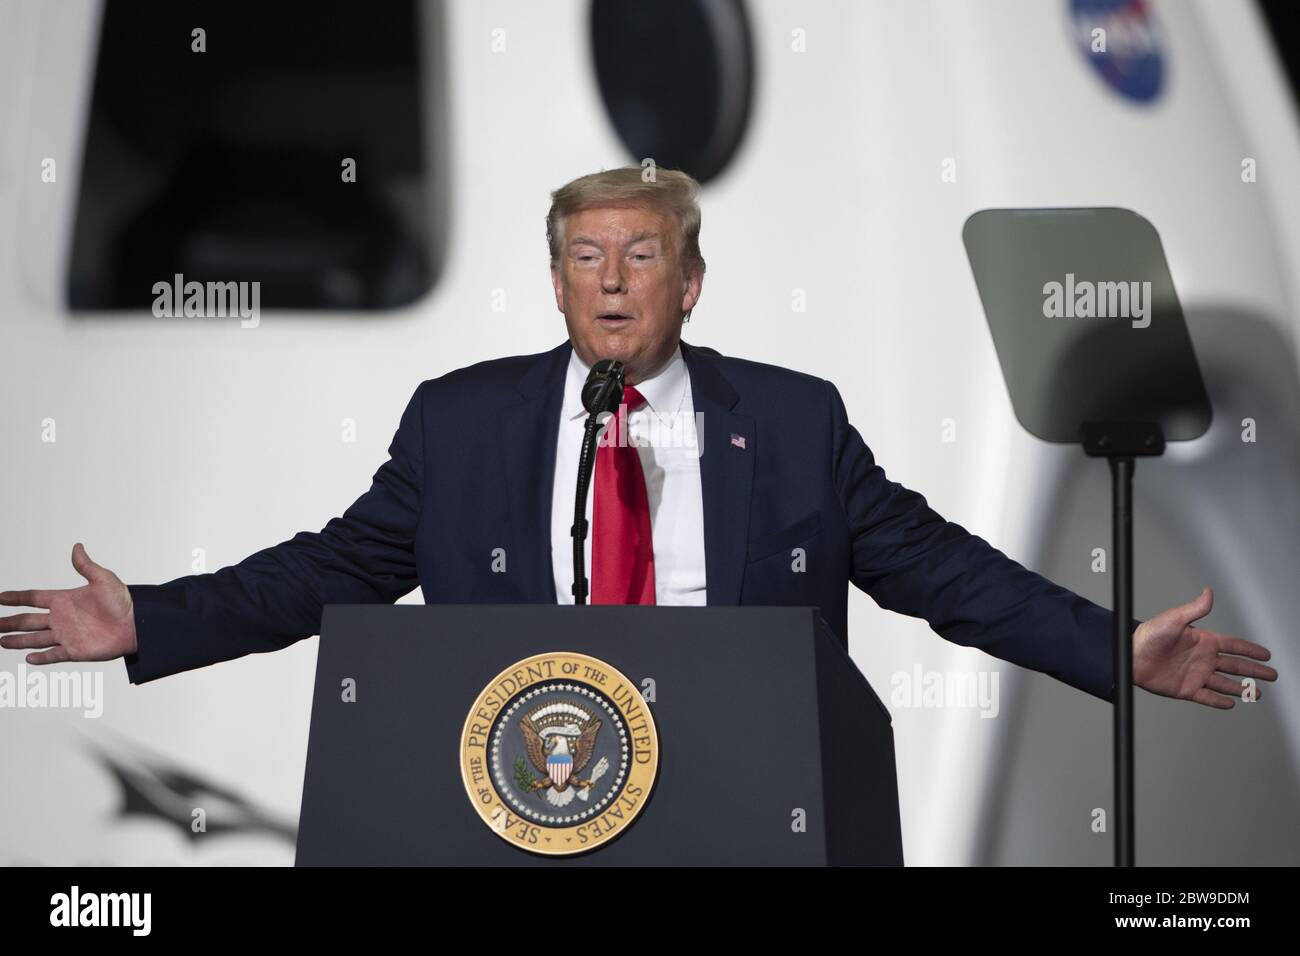 Kennedy Space Center, United States. 30th May, 2020. President Donald Trump makes remarks following the launch of the first crewed NASA/SpaceX mission from the Kennedy Space Center on Saturday May 30, 2020. Photo by Joe Marino/UPI Credit: UPI/Alamy Live News Stock Photo